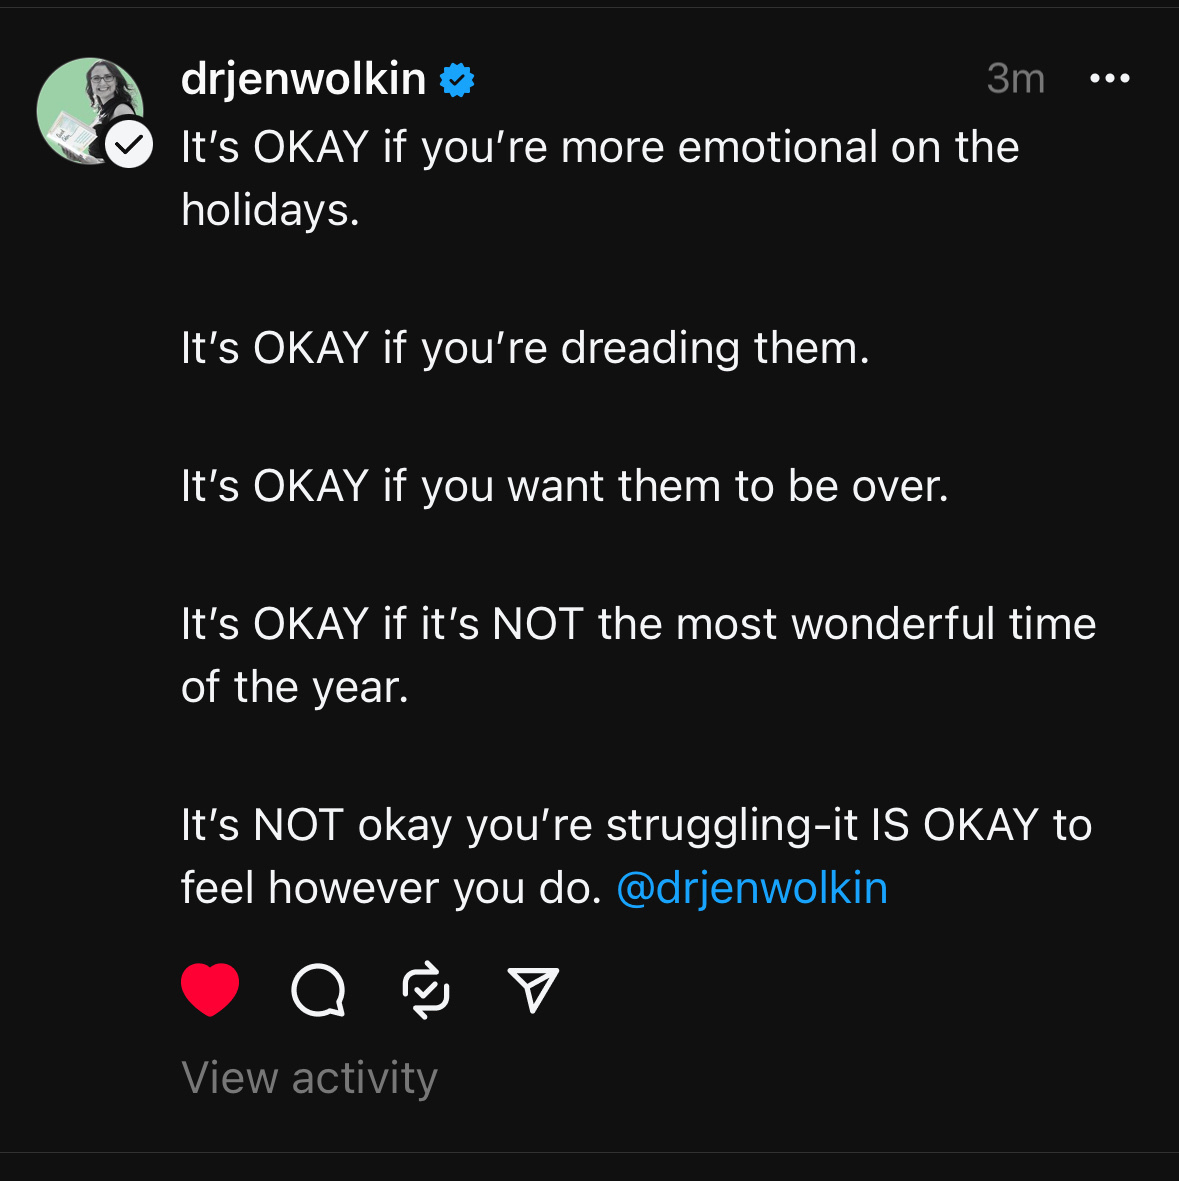 drjenwolkin ©&10;3m&10;It's OKAY if you're more emotional on the holidays.&10;It's OKAY if you're dreading them.&10;It's OKAY if you want them to be over.&10;It's OKAY if it's NOT the most wonderful time of the year.&10;It's NOT okay you're struggling-it IS OKAY to feel however you do. @drjenwolkin